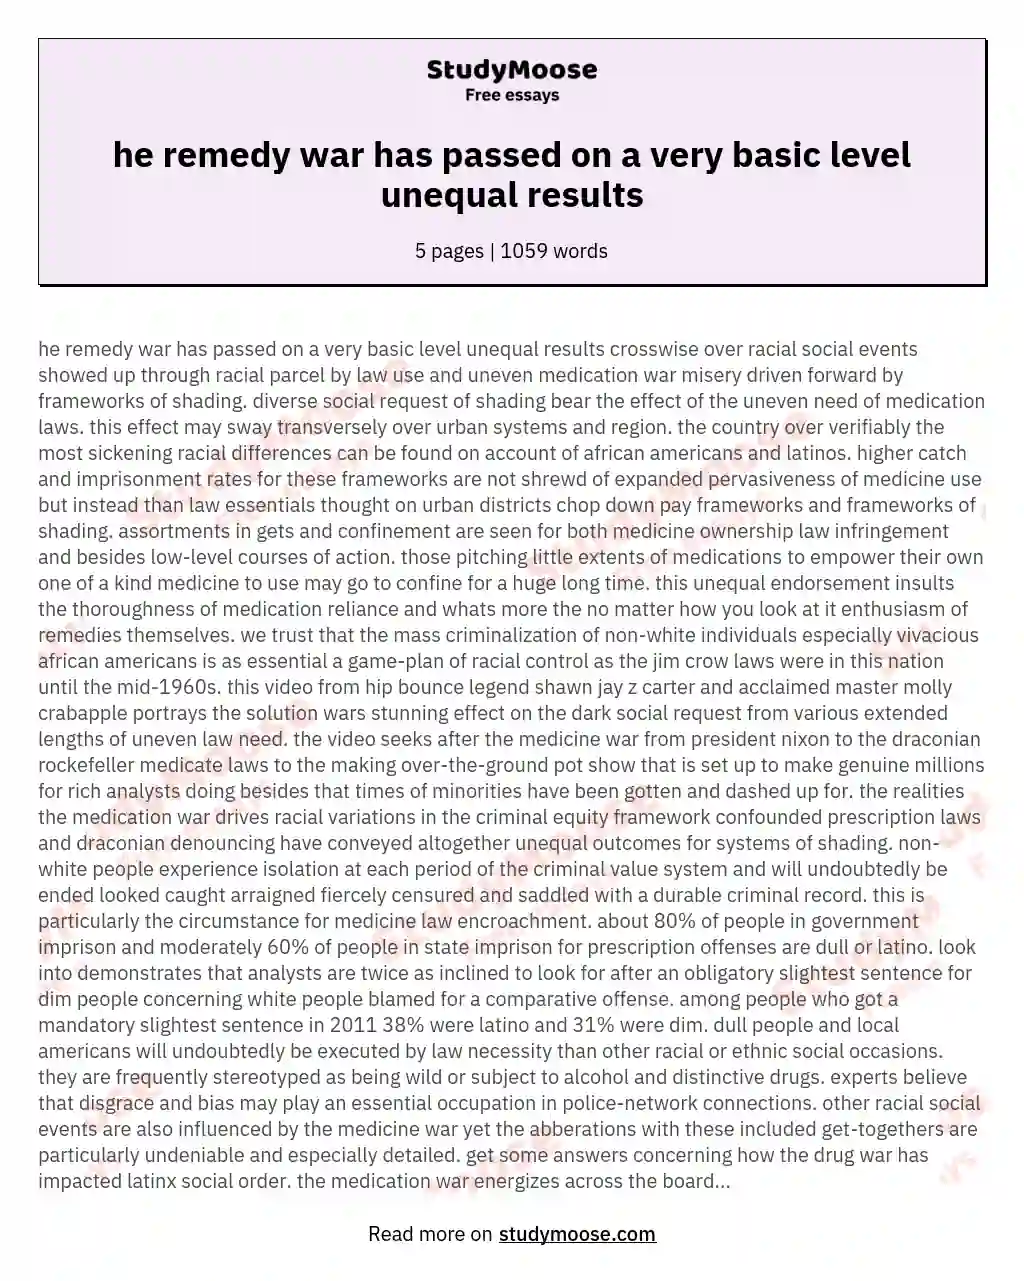 he remedy war has passed on a very basic level unequal results essay